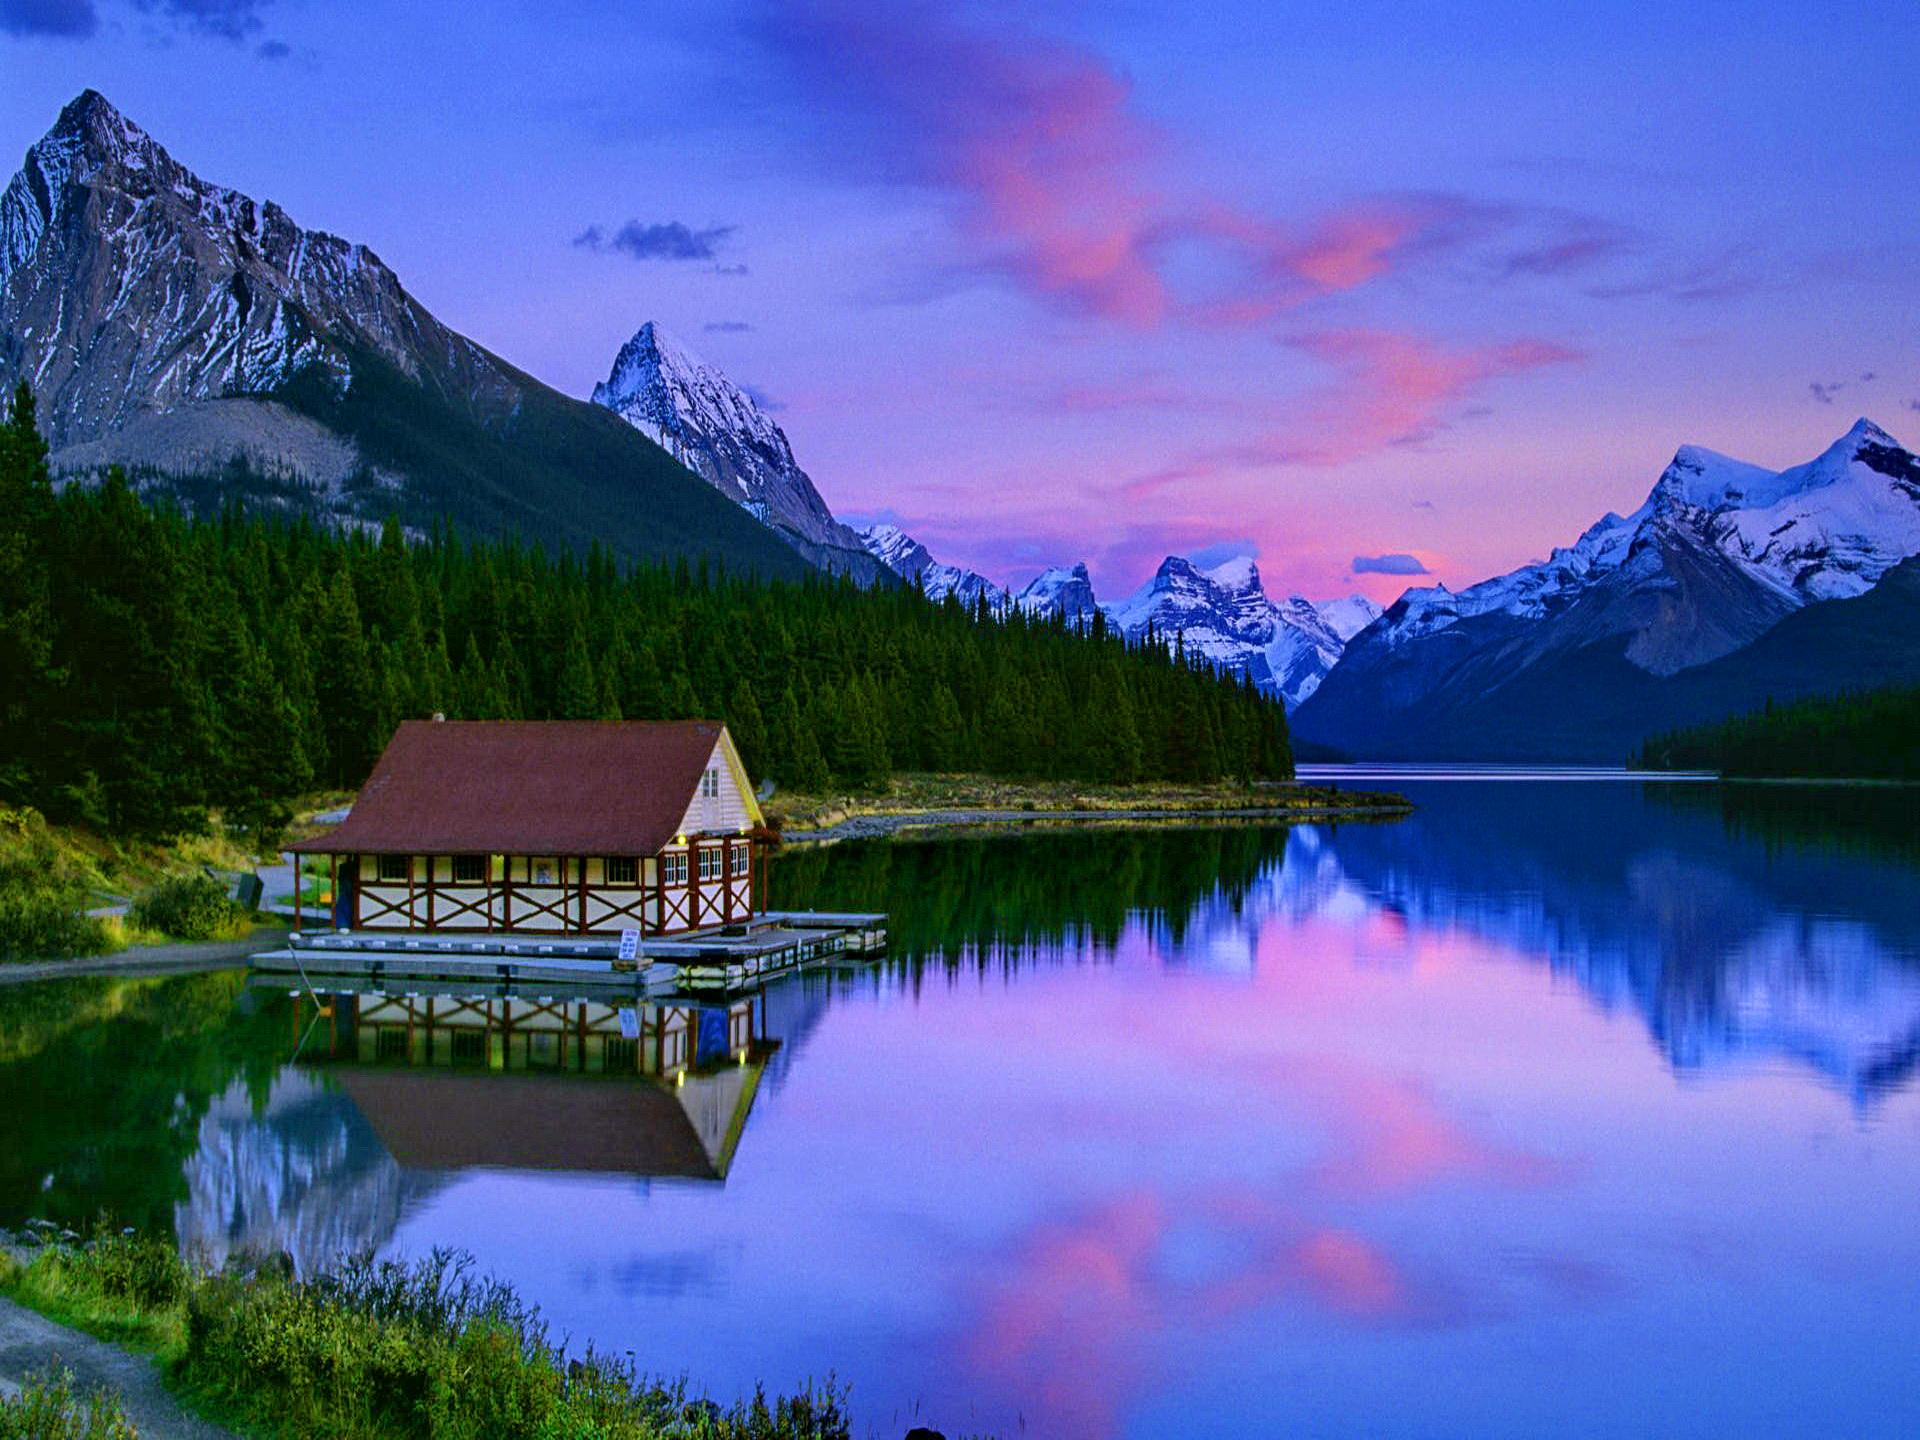 man made, cabin, forest, lake, mountain, pine, reflection, sunset, tree